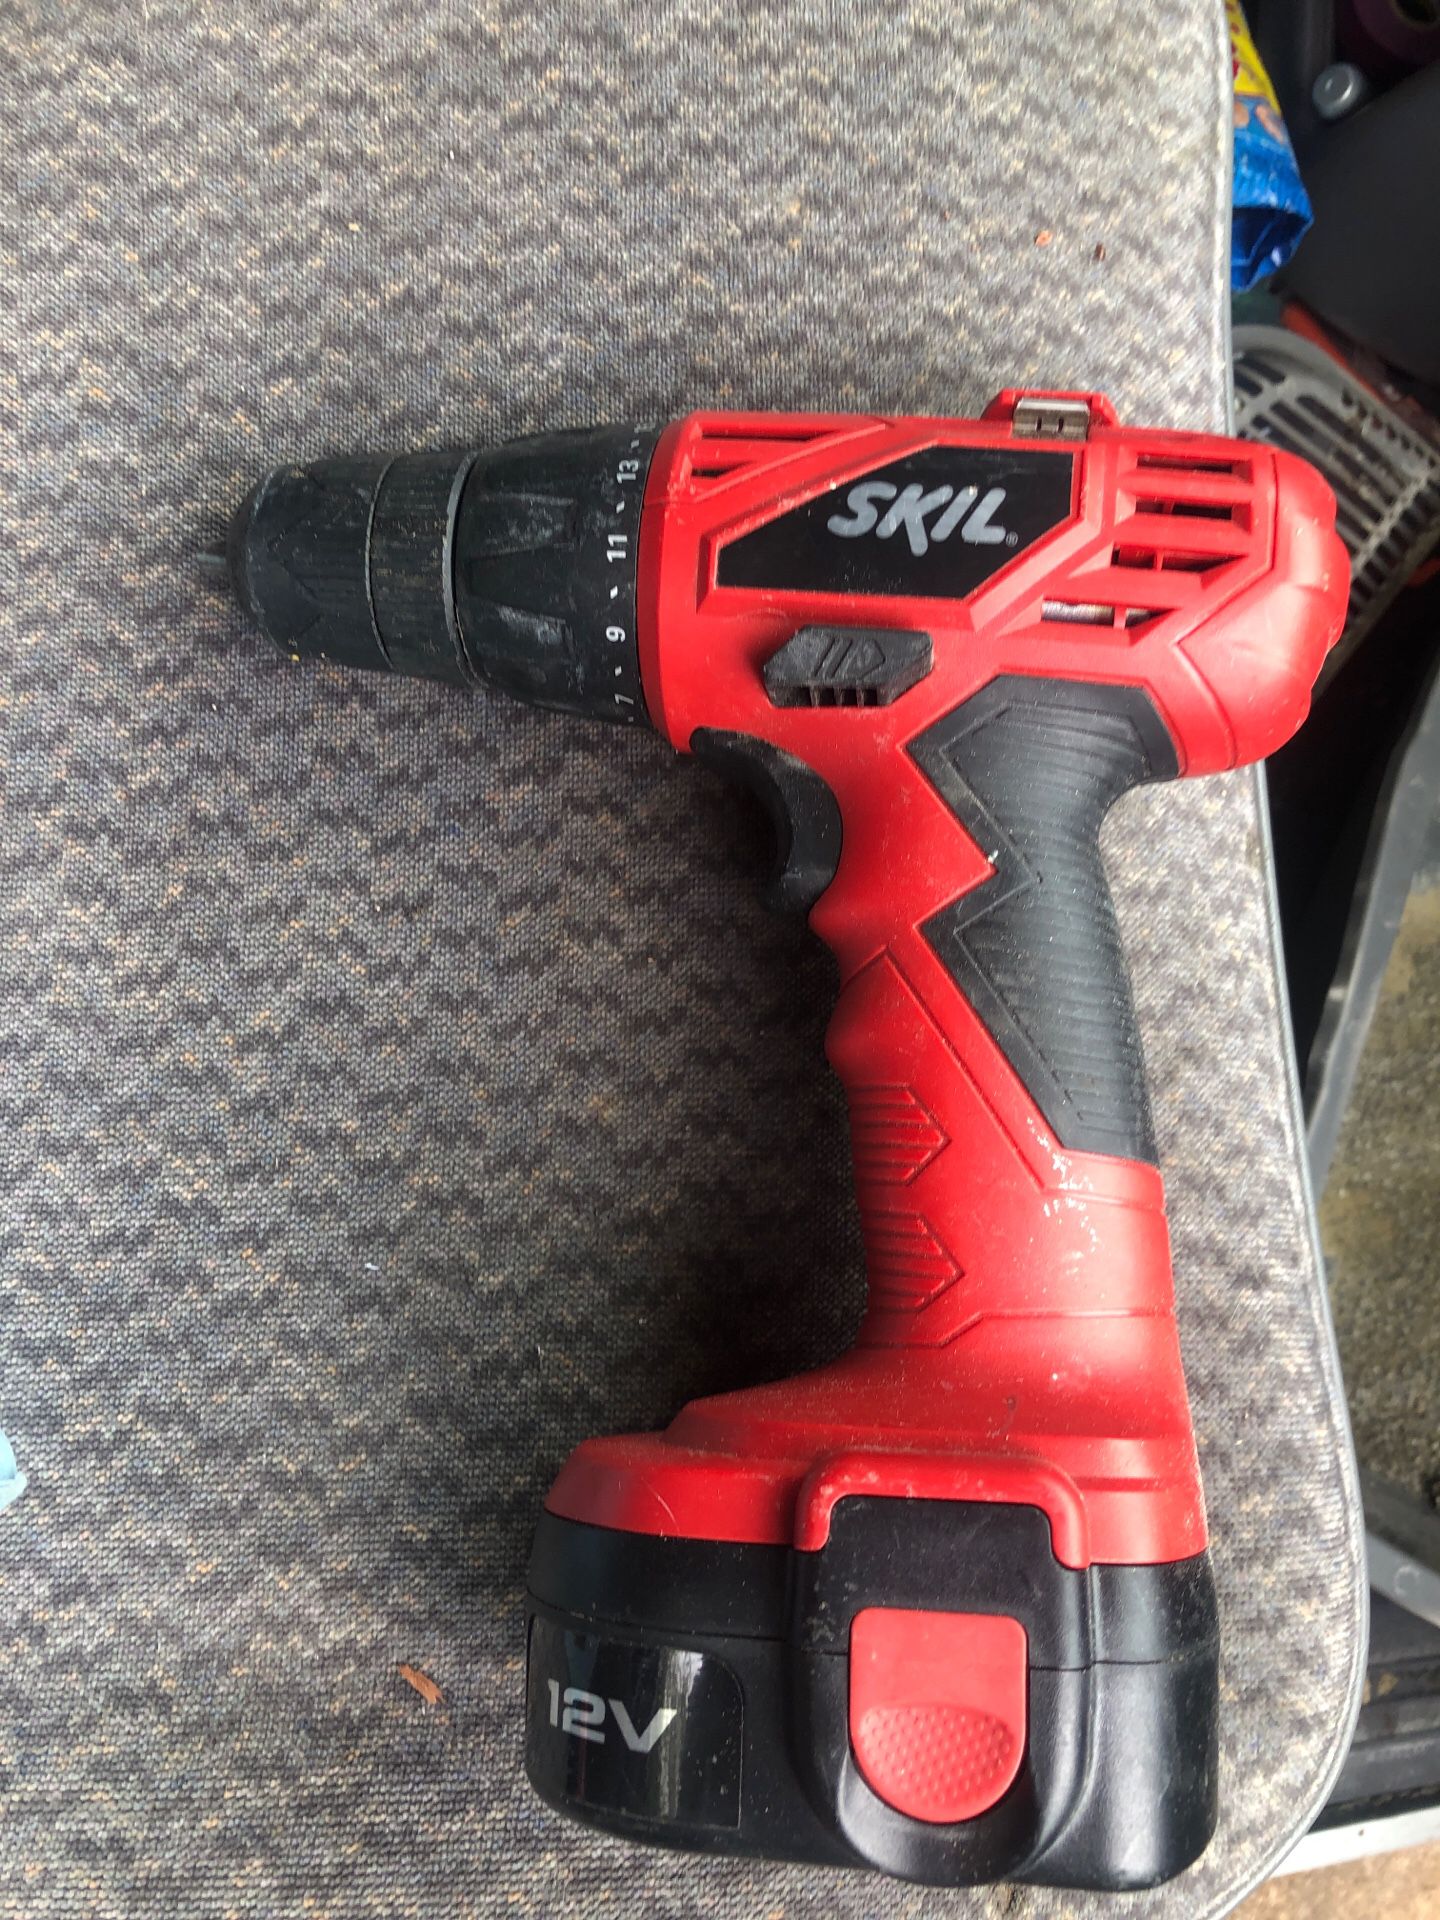 SKIL BRAND DRILL AND BATTERY BRAND NEE CHARGER WENT MISSING ASKING 20$ obo thanks